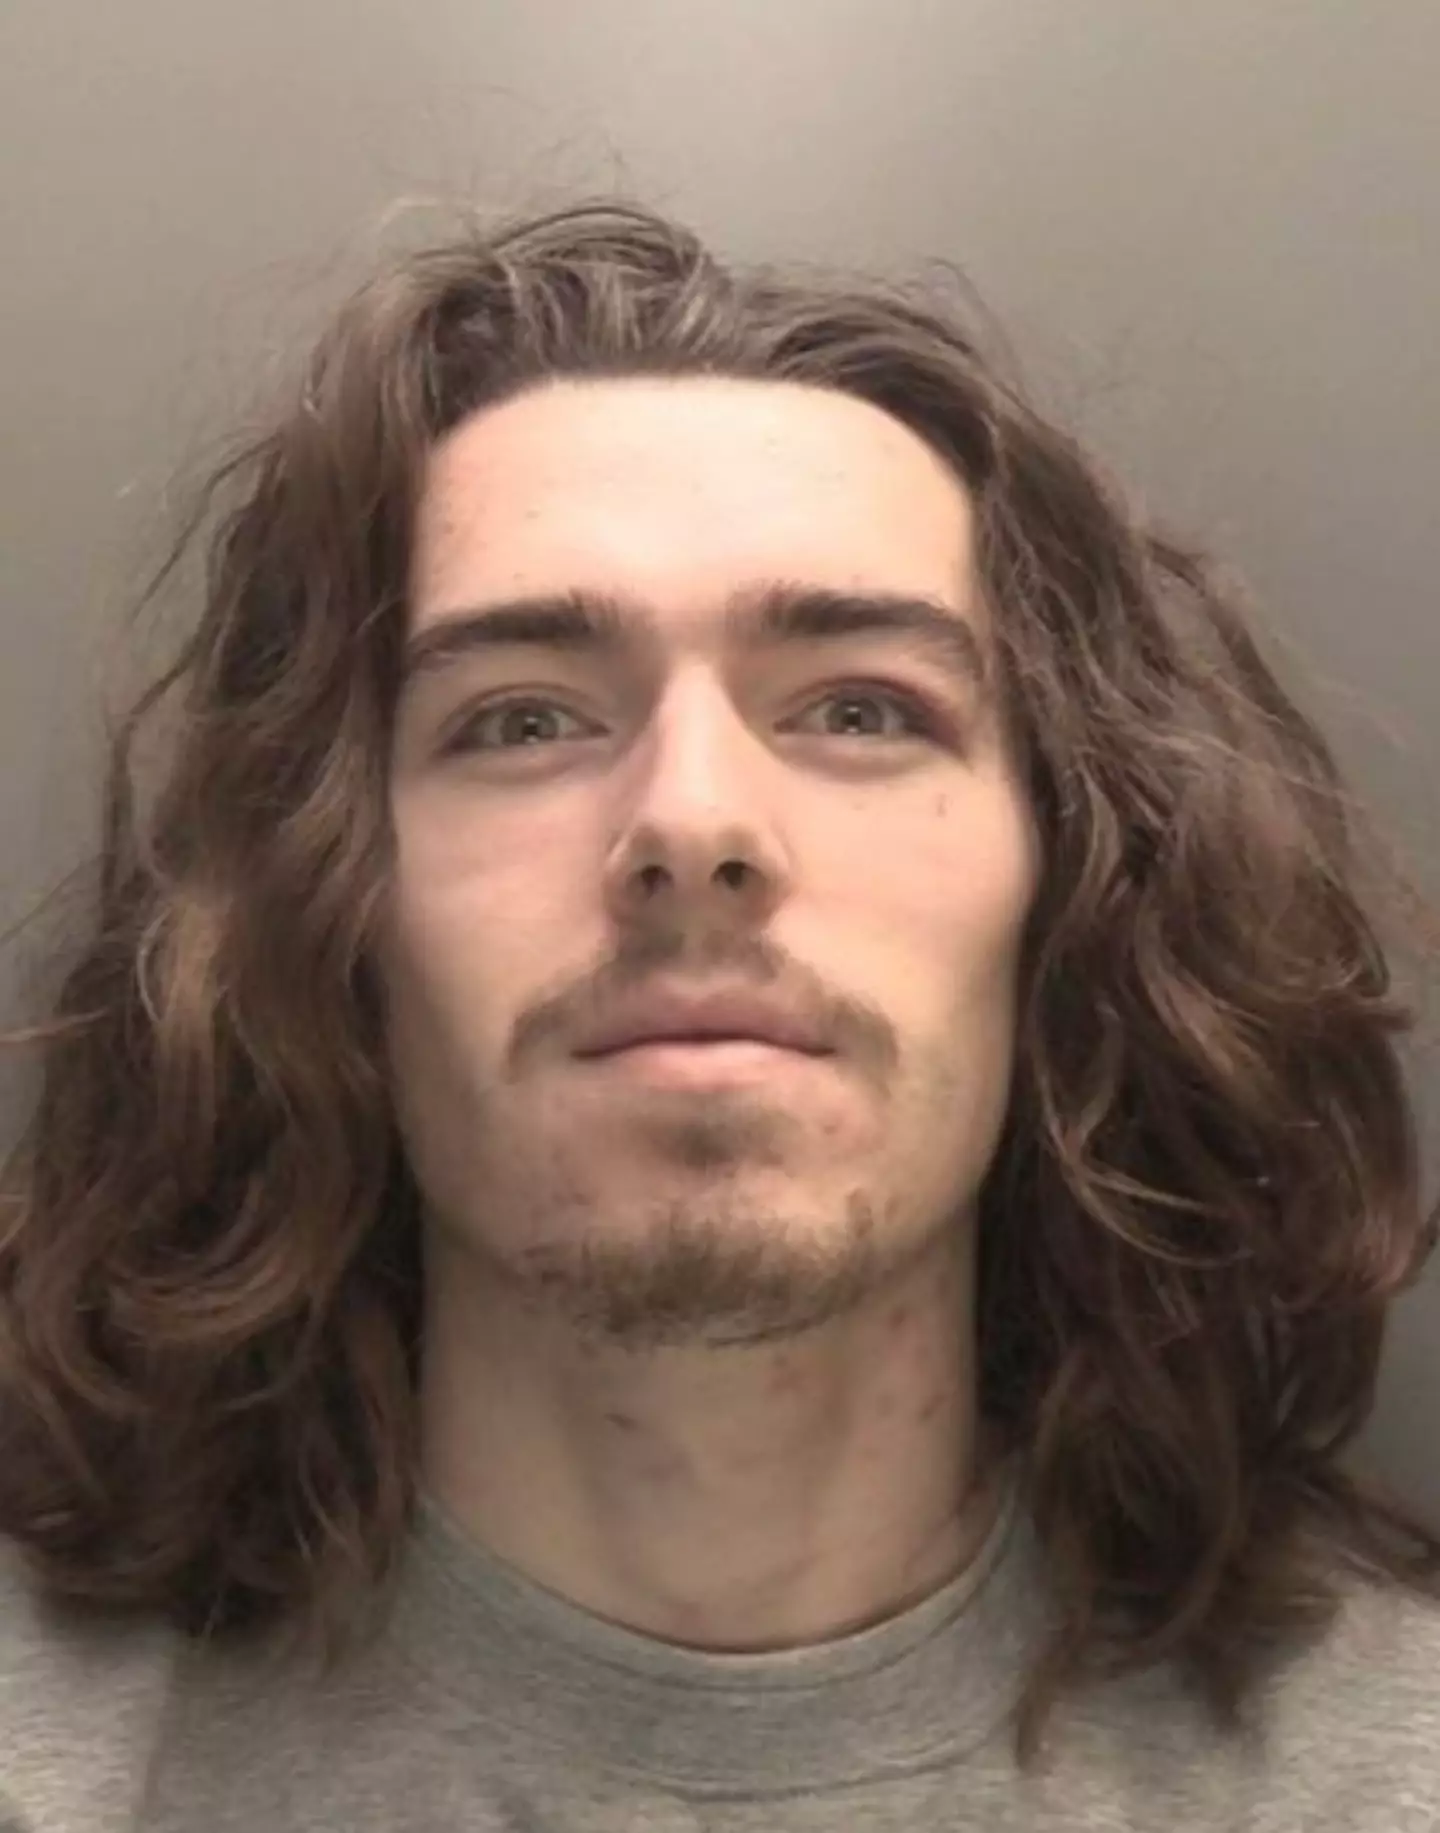 Connor Chapman was found guilty of murdering Elle Edwards.